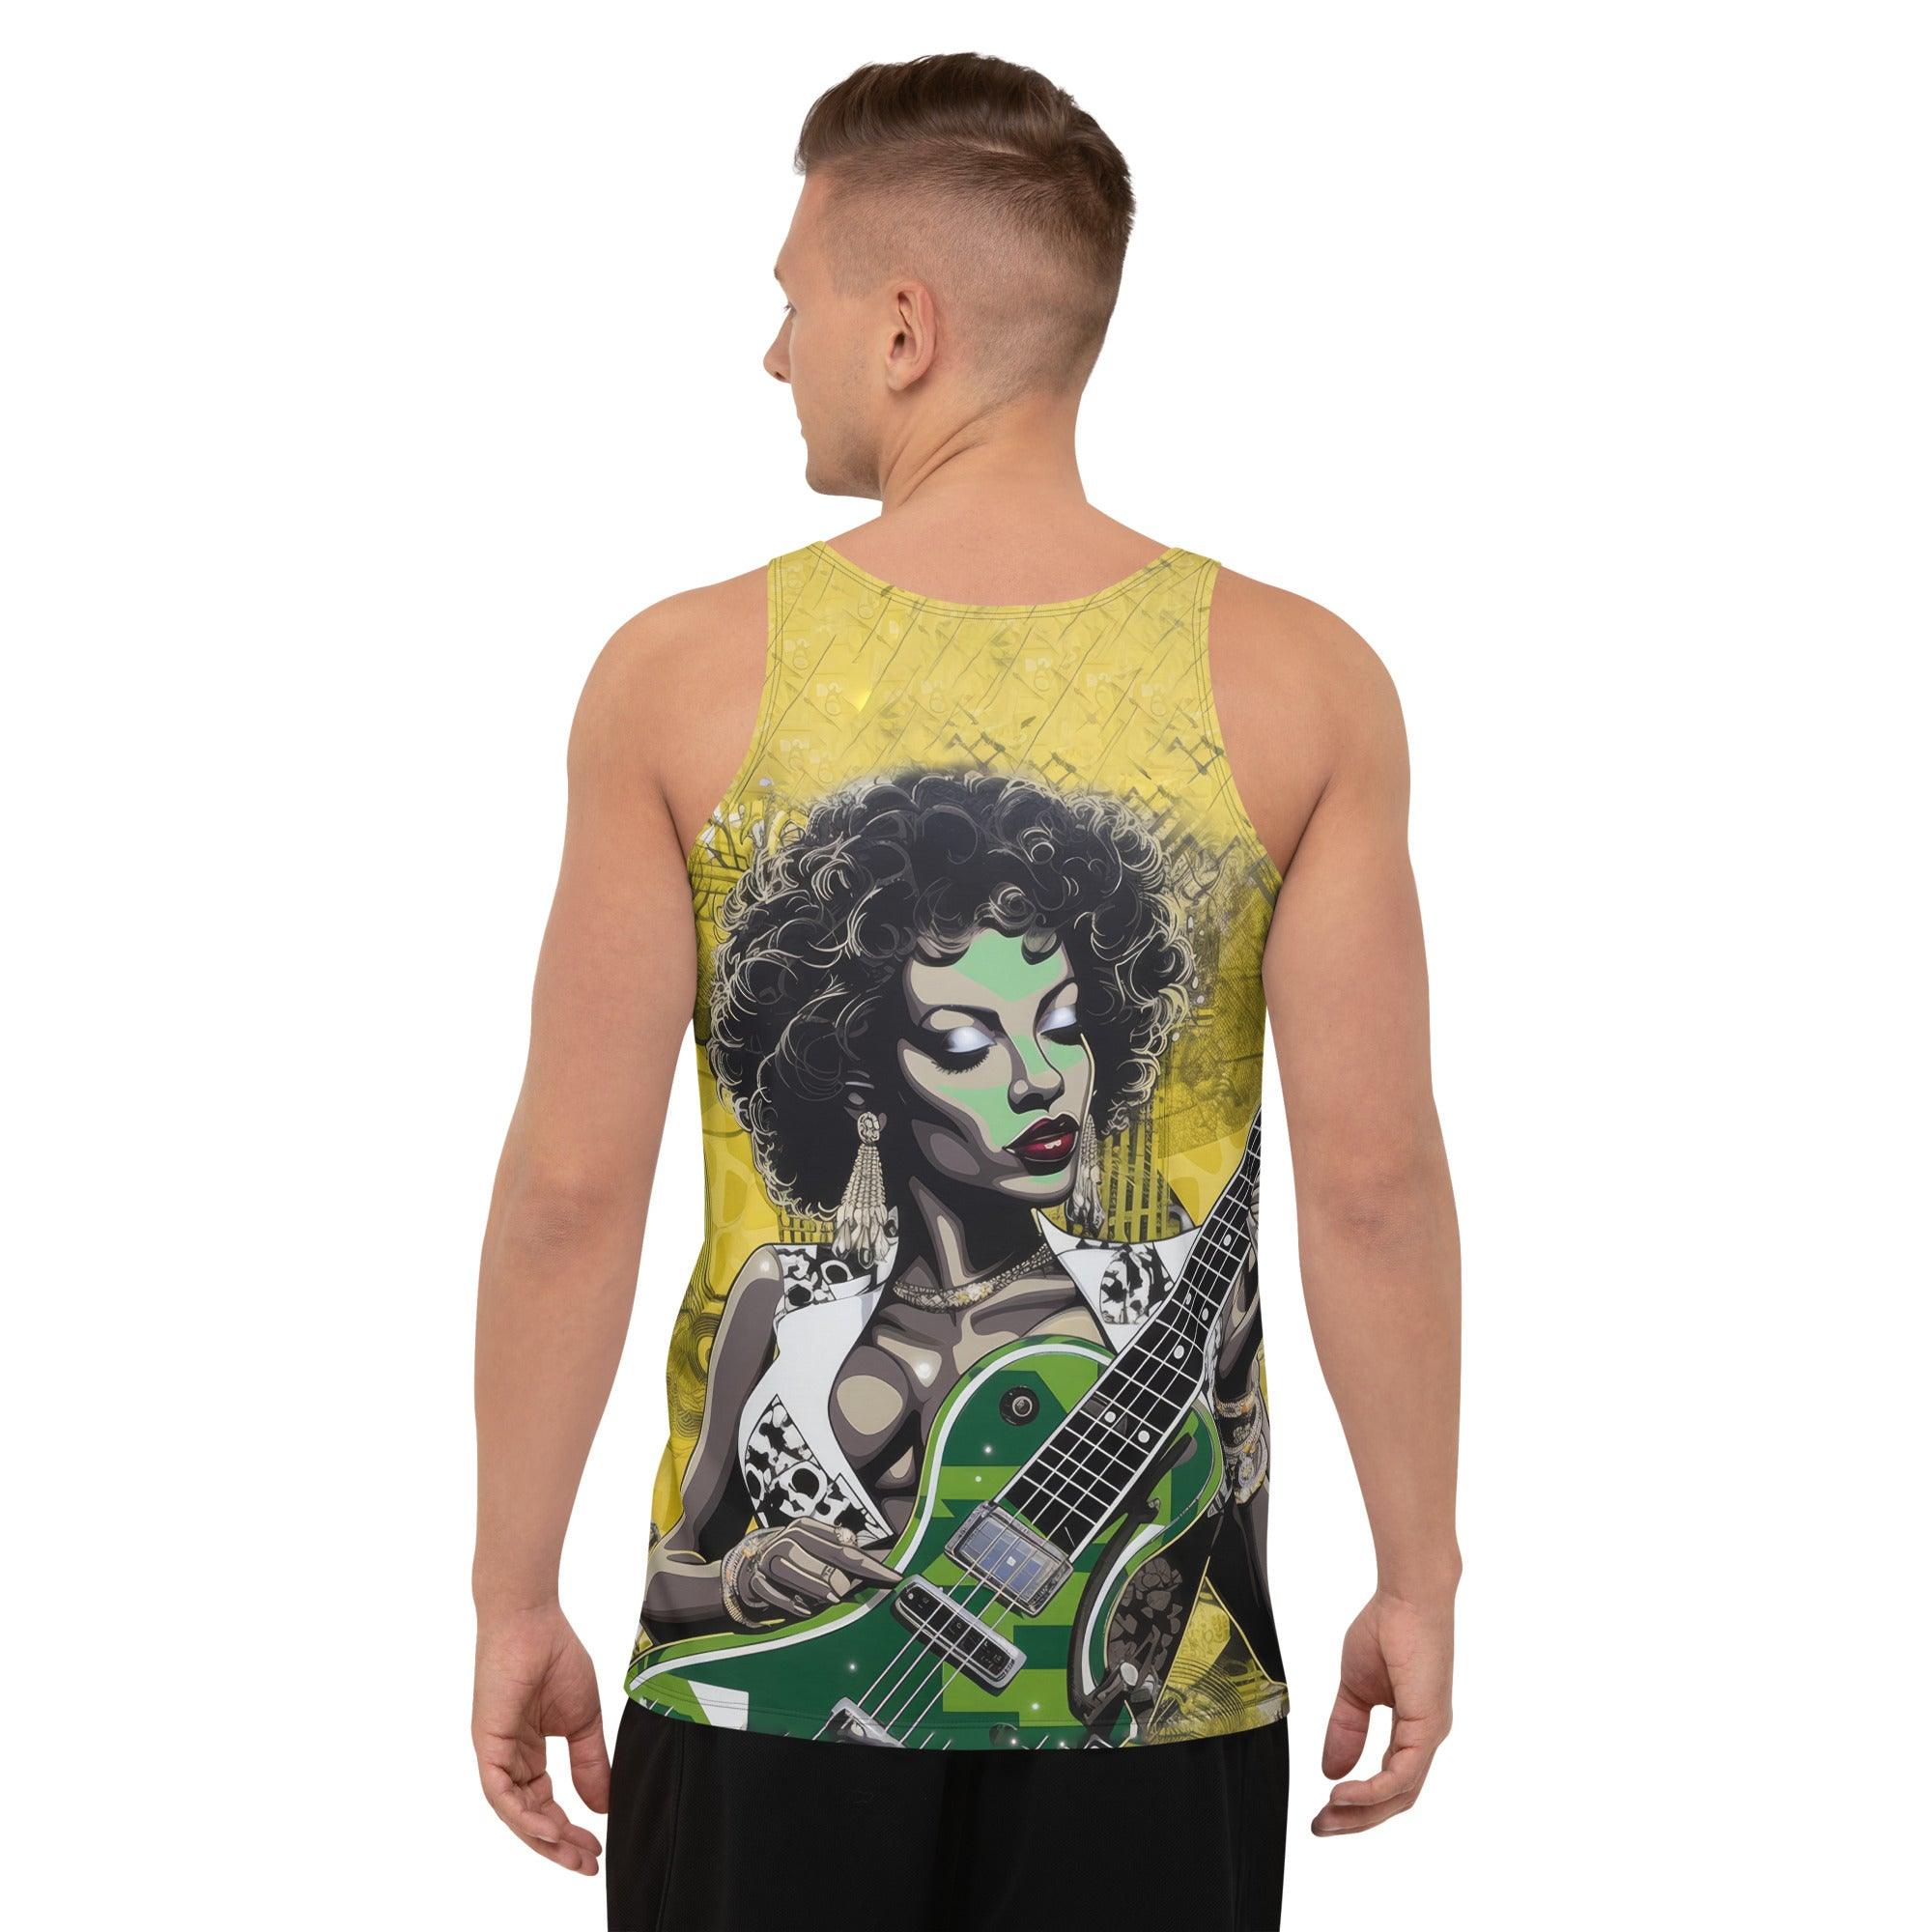 Unisex Tank Top with Live Music Theme